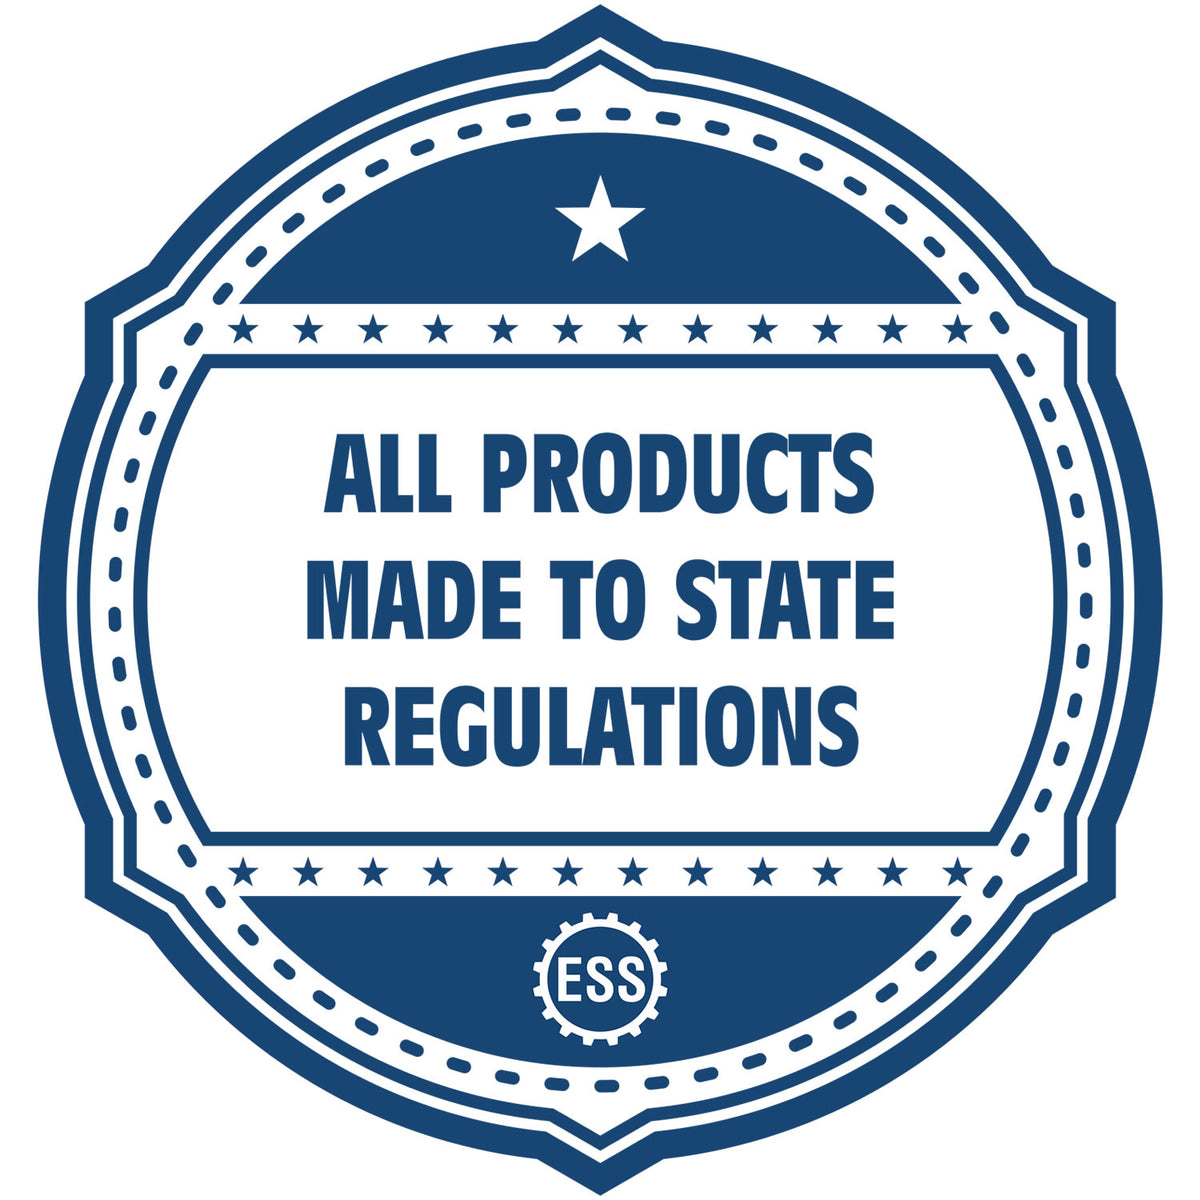 A blue icon or badge for the Hybrid Maine Land Surveyor Seal showing that this product is made in compliance with state regulations.